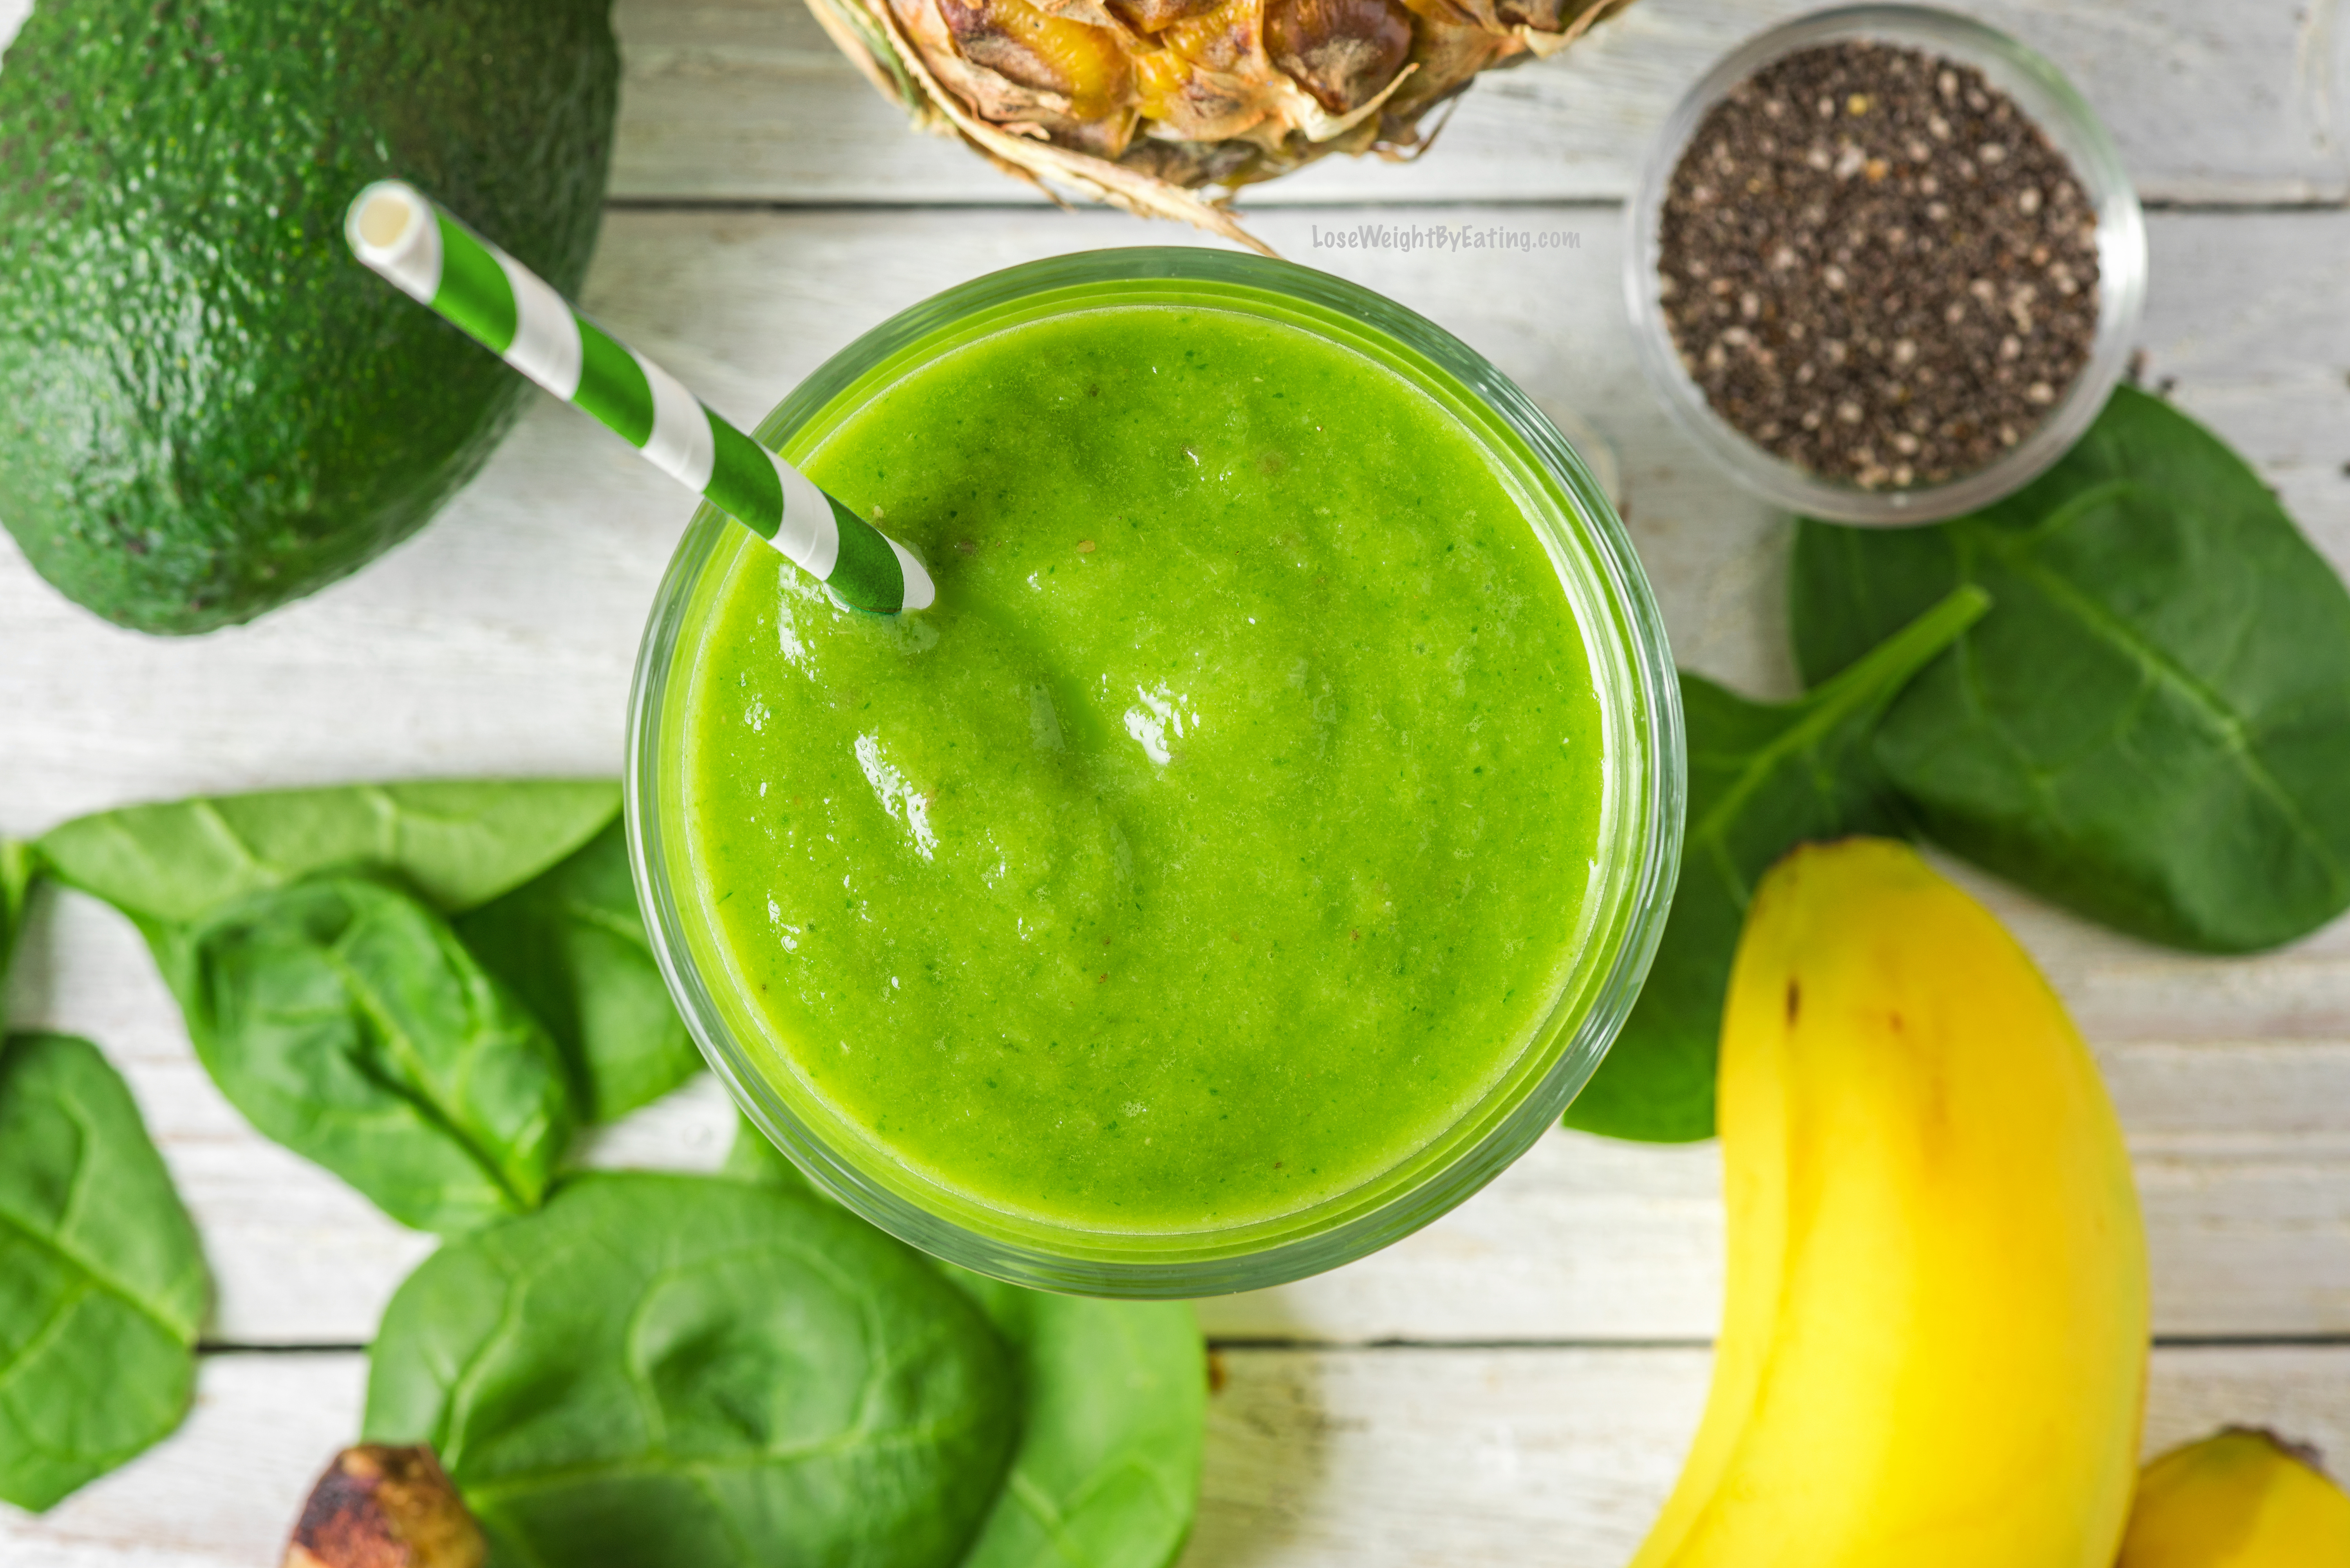 Fat Burning Green Tea and Vegetable Smoothie - All Nutribullet Recipes